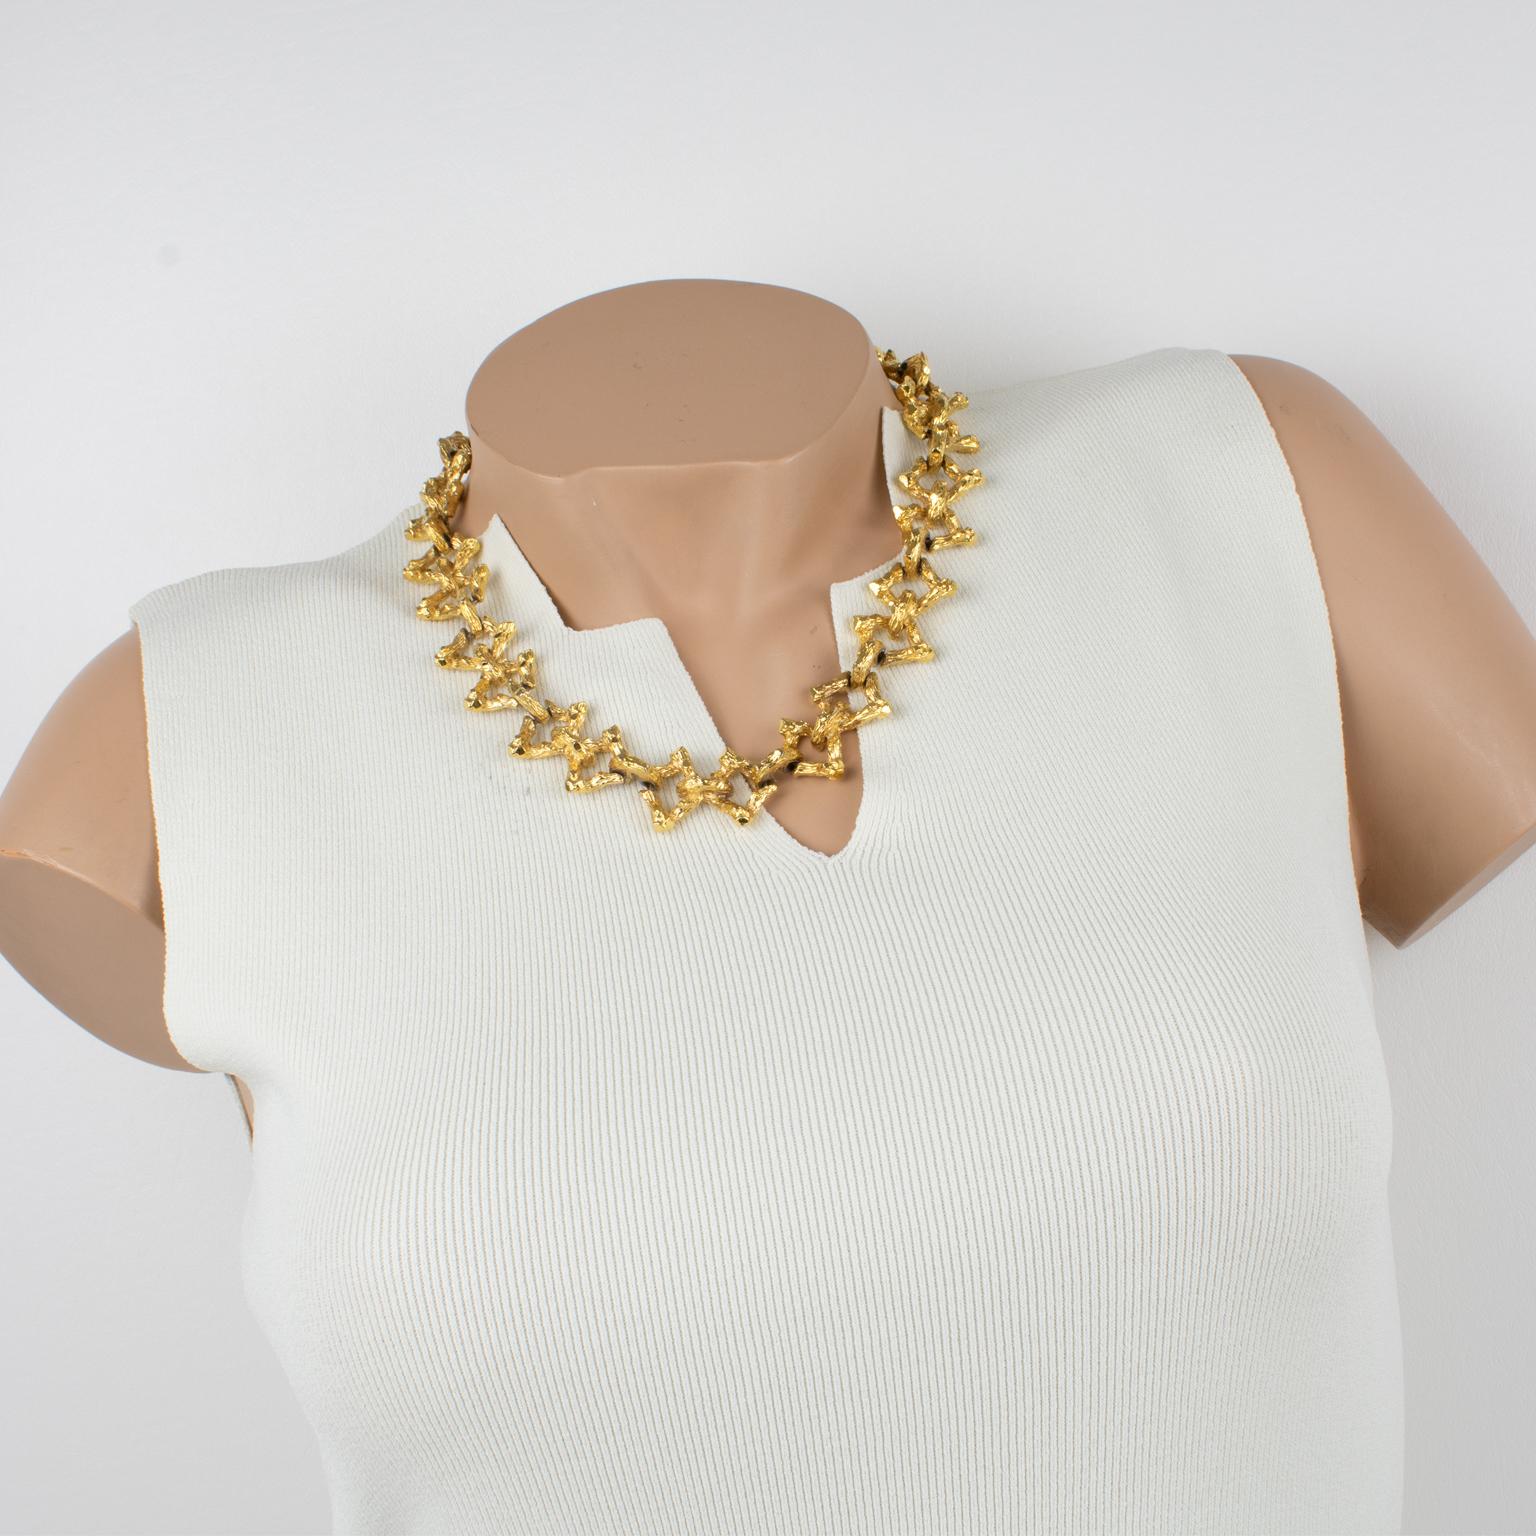 This lovely French designer Guy Laroche Paris choker necklace features a dimensional brutalist shape, with gilt metal all textured. The choker has a toggle closing clasp and is signed on the underside near the fastening Guy Laroche - Paris.
The